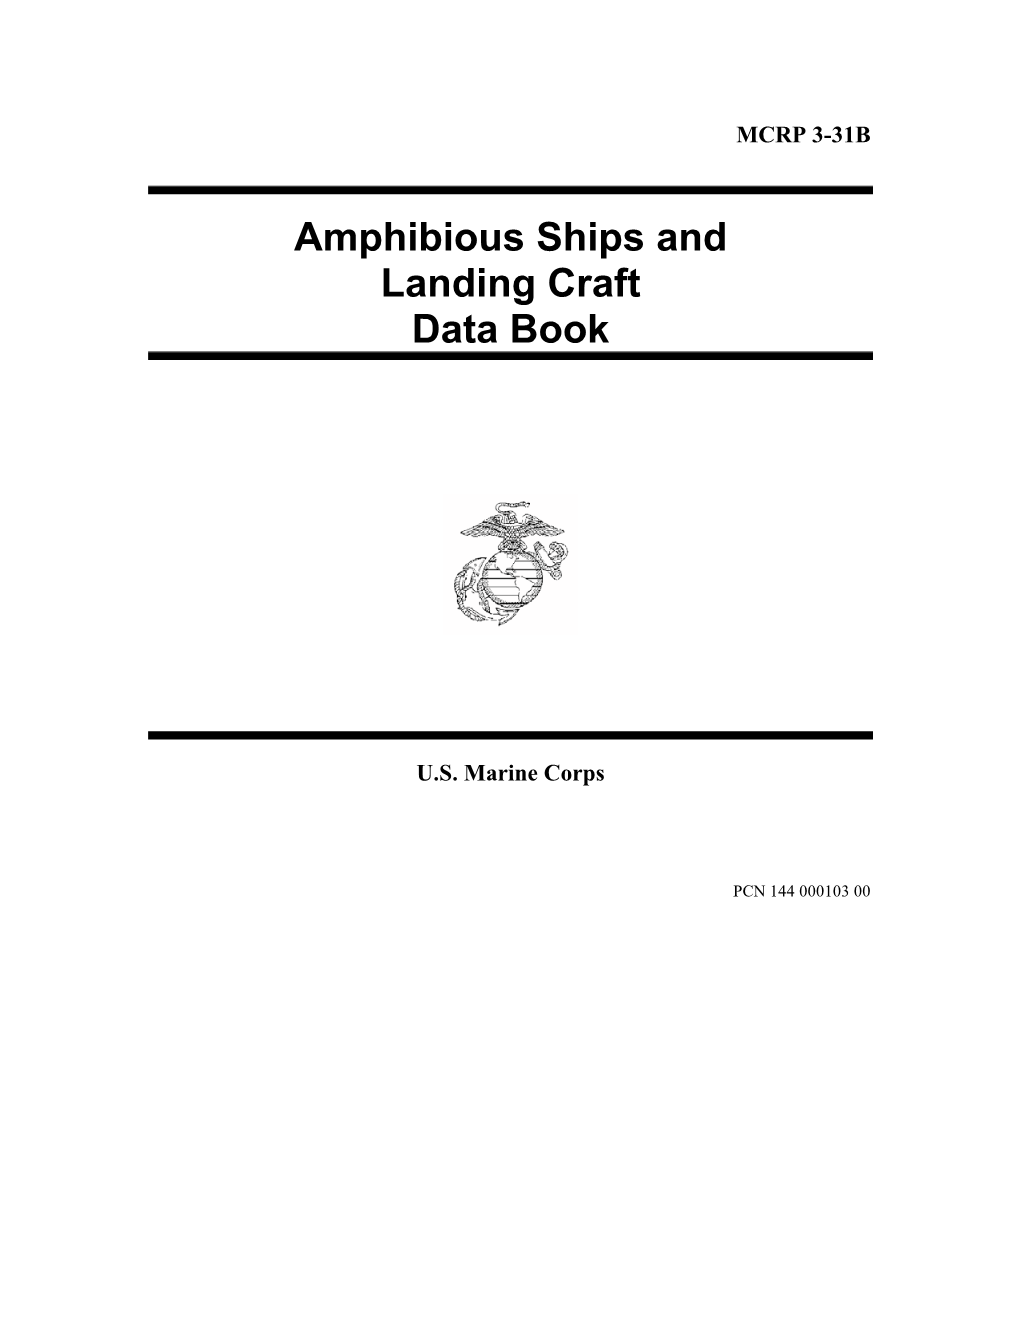 Amphibious Ships and Landing Craft Data Book, Is for Use in Planning Where Generalized Capabilities and Measurements Are Required